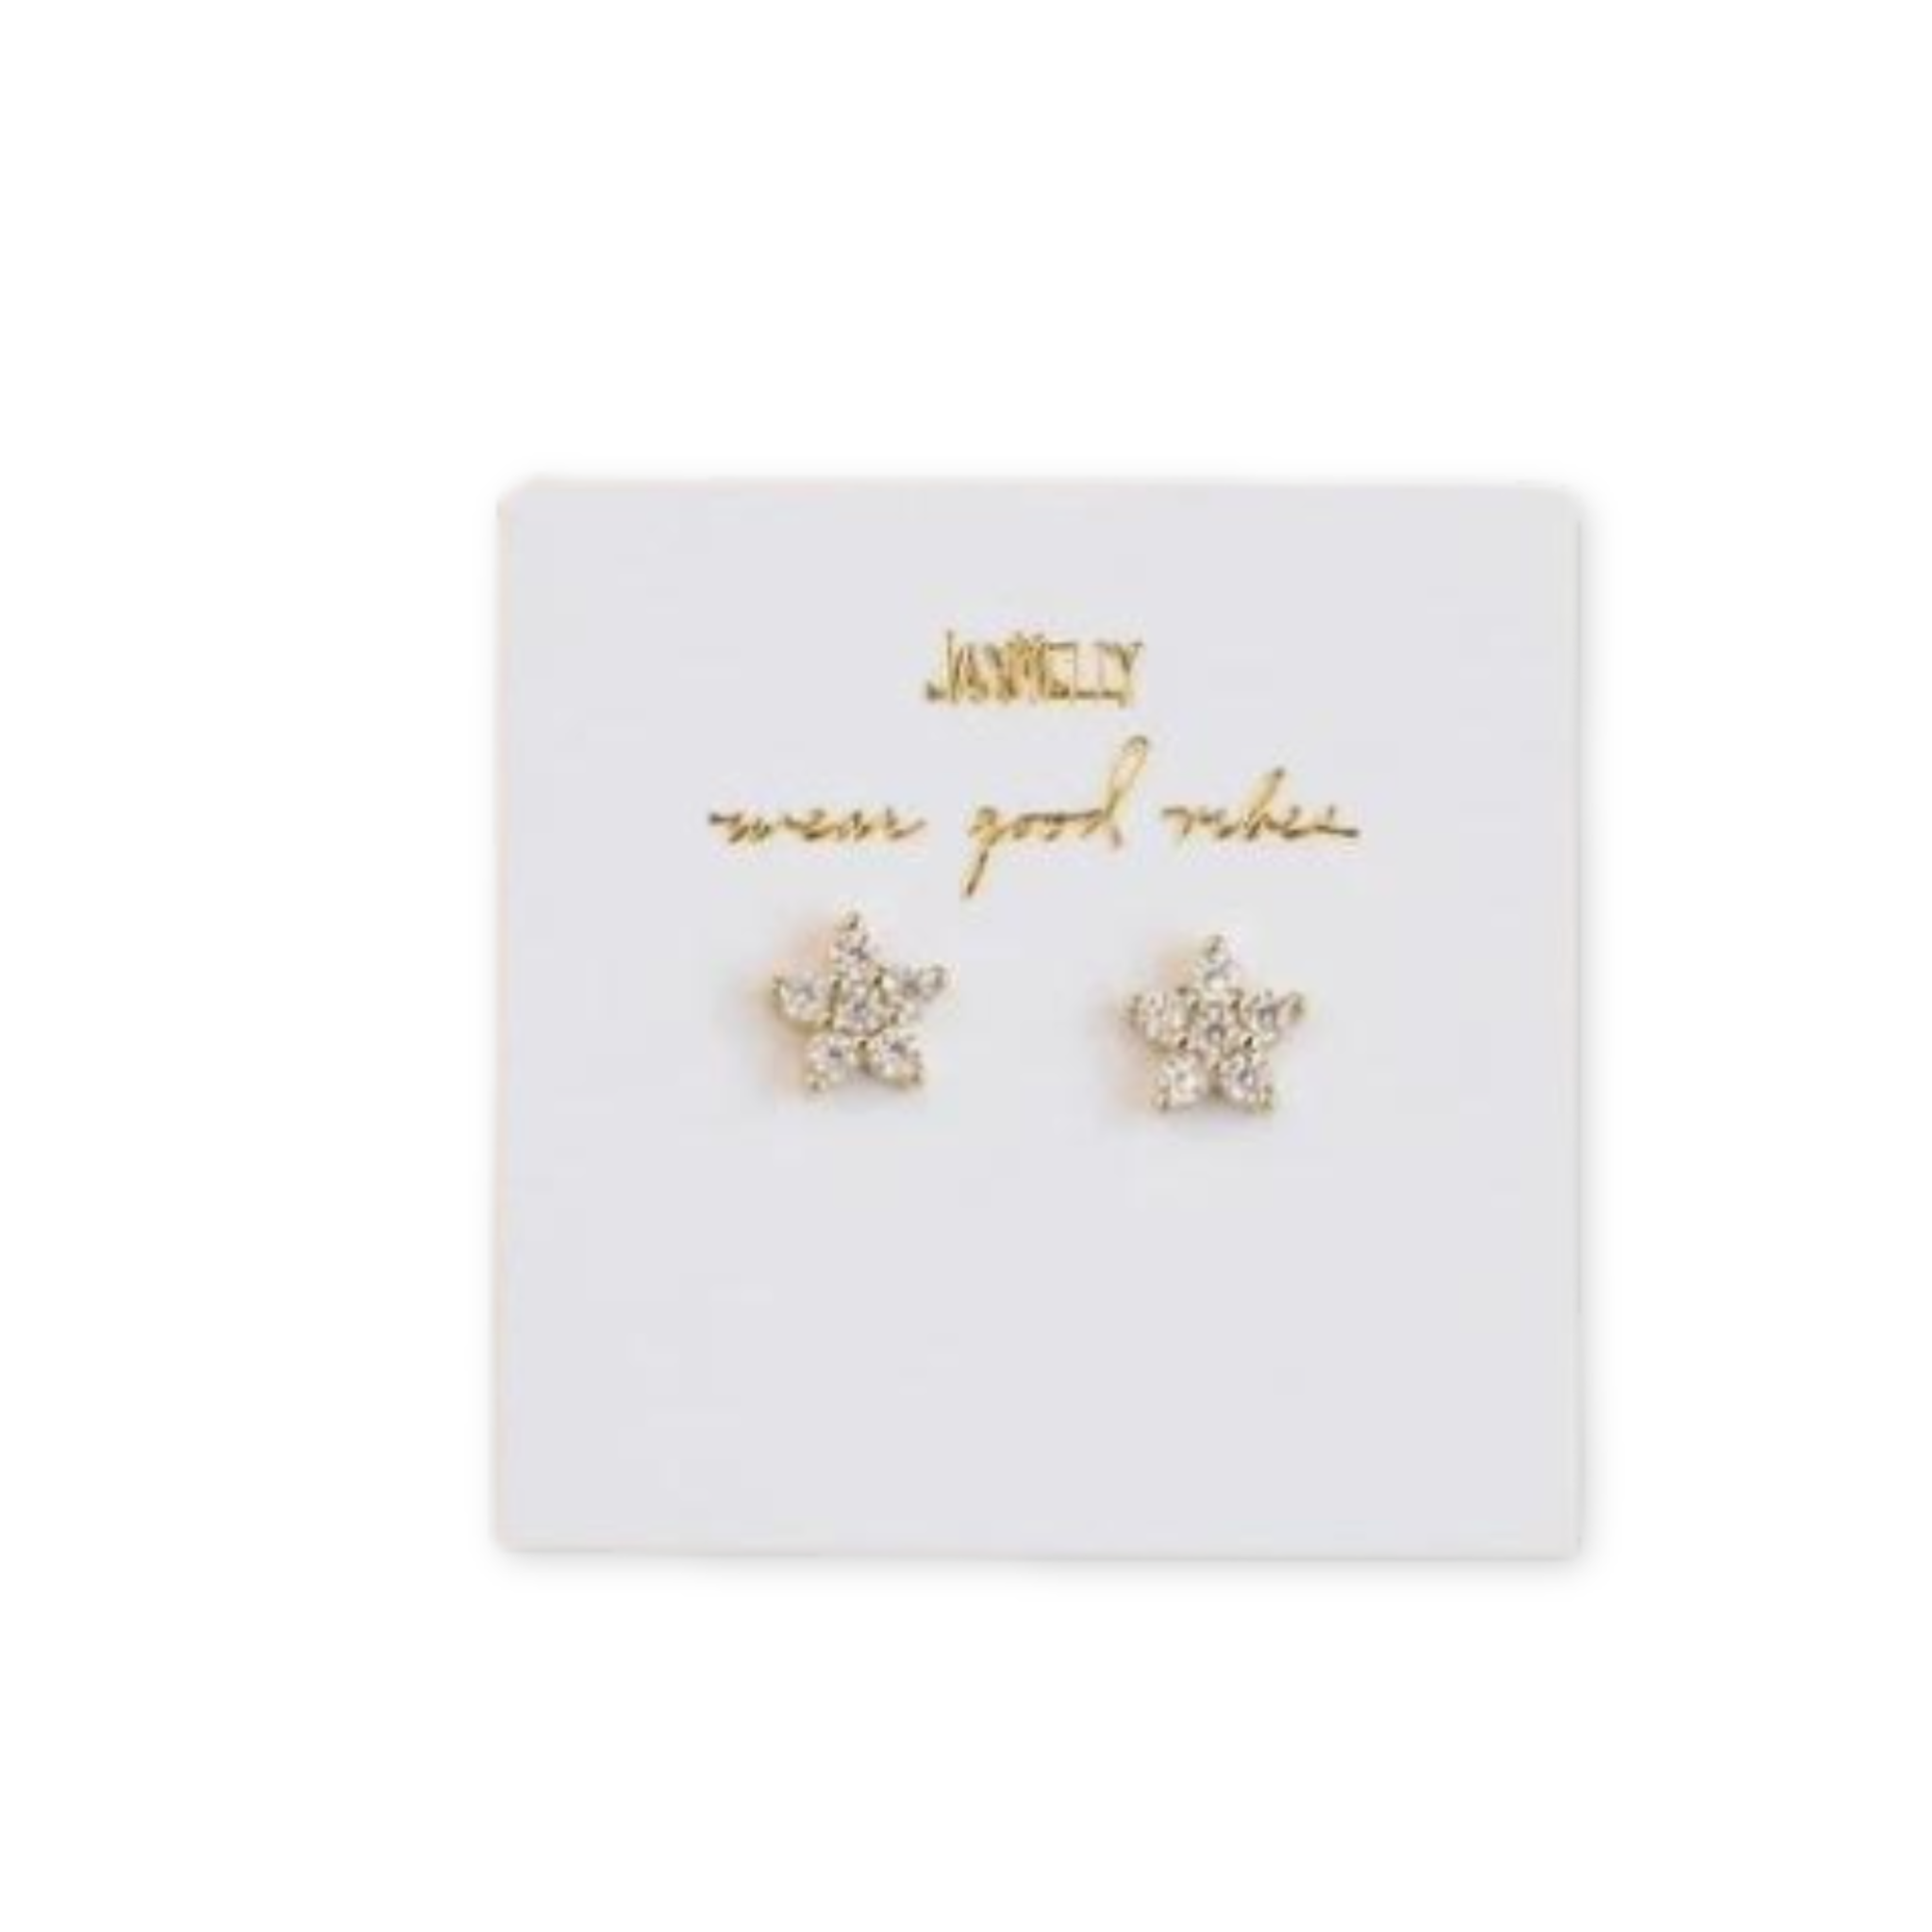 flower shaped studs made from cubic zirconia stones